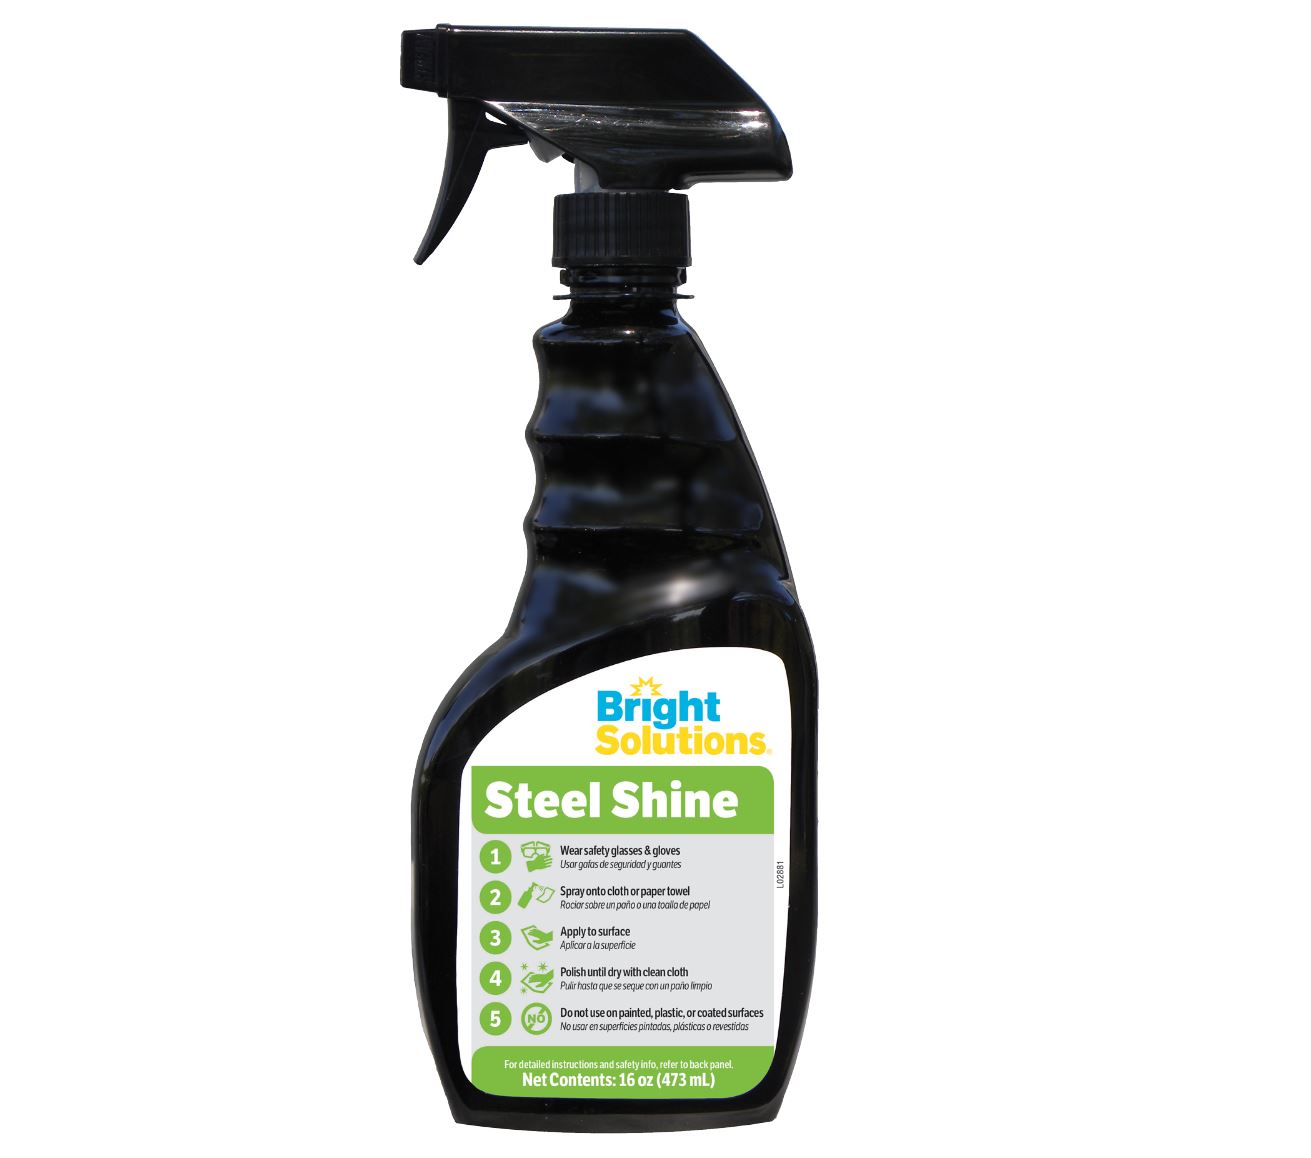 6/1qt Steel Shine Stainless Steel Cleaner. For cleaning, polishing and protecting stainless steel in the following industries: Kitchens & food service, Food processing systems, Industrial machinery, Bath fittings, and Automotive